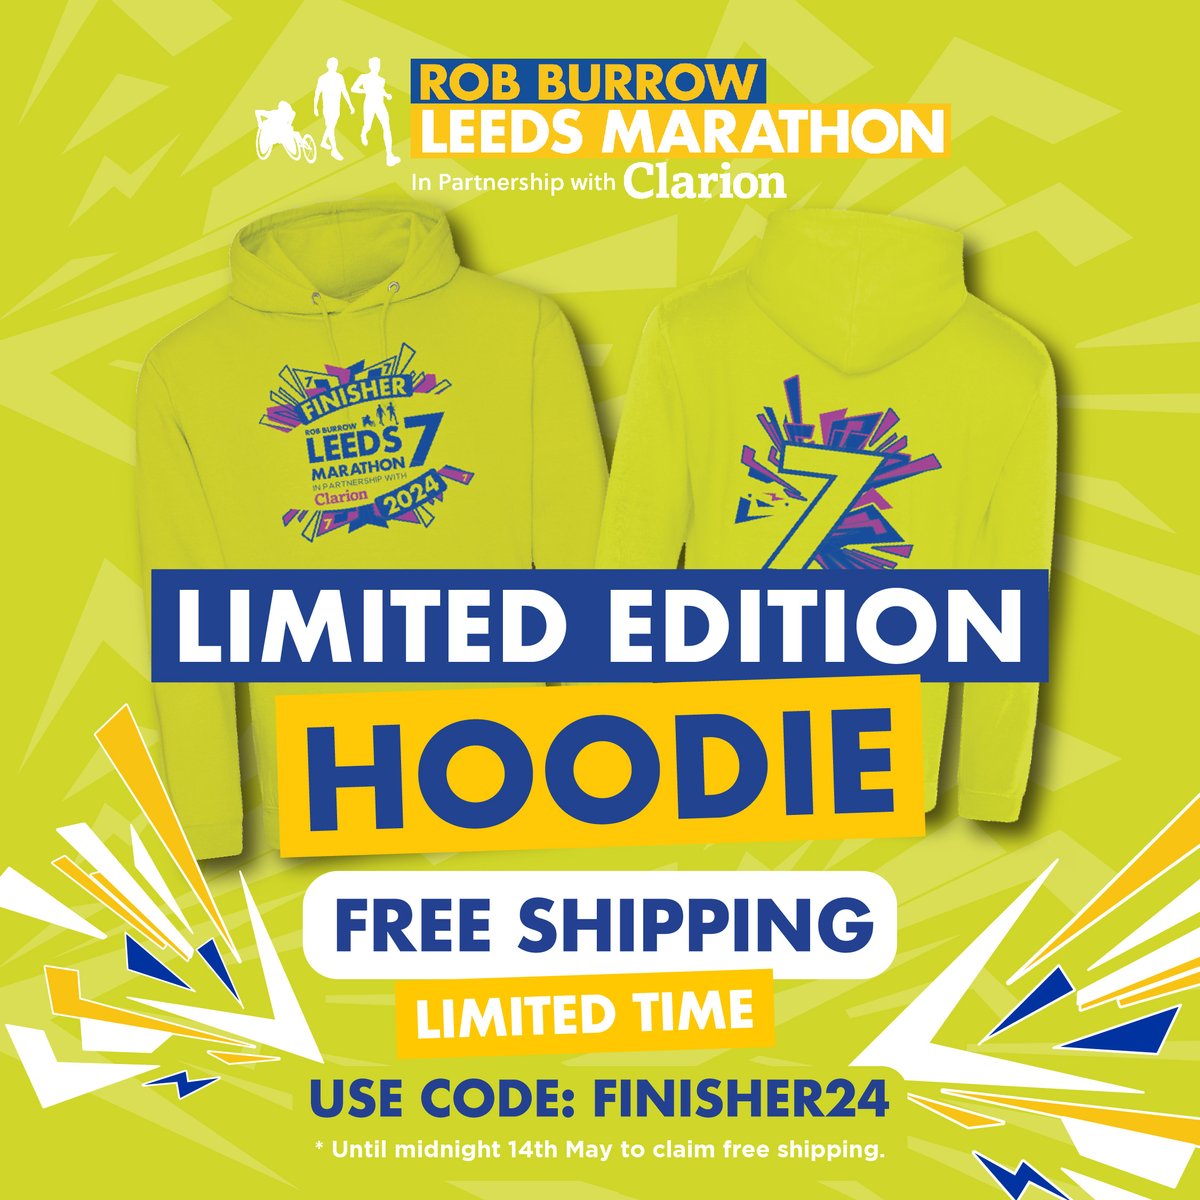 🚨LIMITED TIME ONLY🚨 Now is your chance to secure your Rob Burrow Leeds Marathon limited edition hoodie. Use code FINISHER24 to receive free shipping. You haven't got long, the offer ends at midnight tomorrow. #runforall #robburrowleedsmarathon #leedshalfmarathon